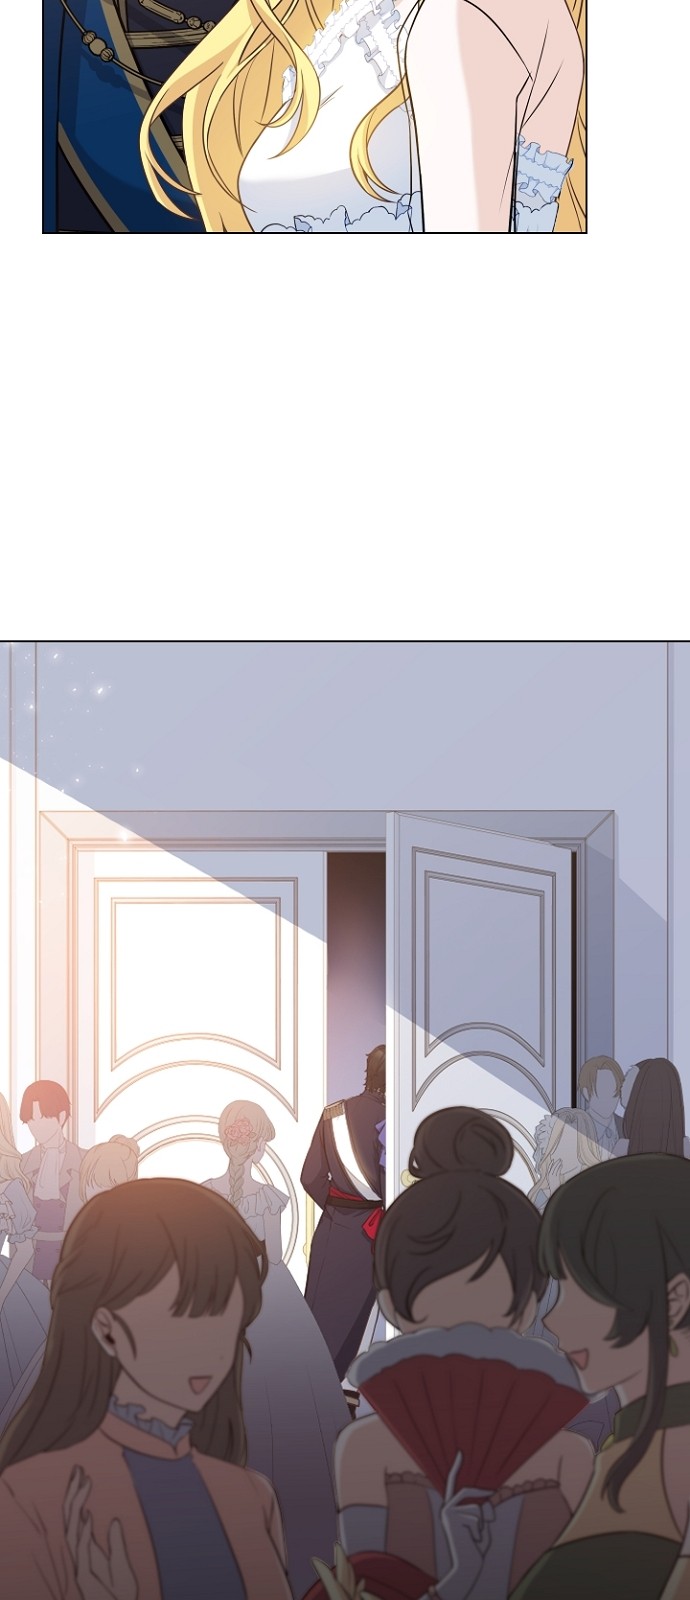 His Majesty's Proposal (A Night With the Emperor) - Chapter 34 - Page 69